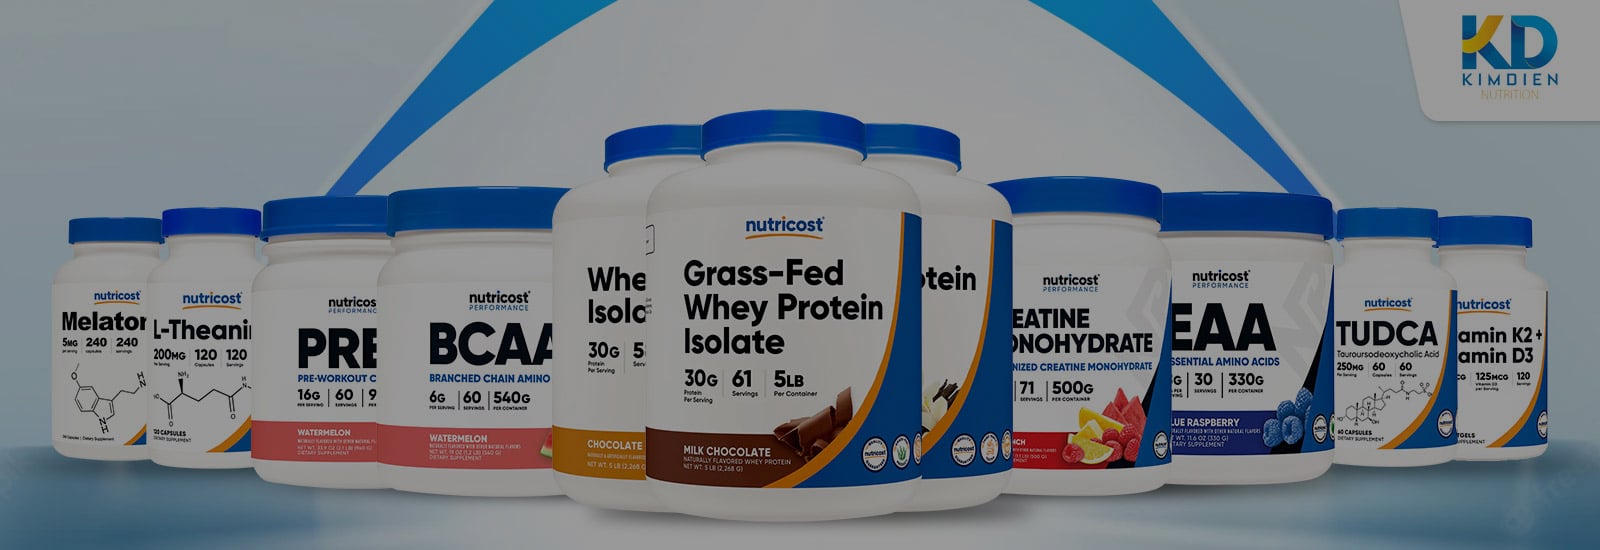 NUTRICOST